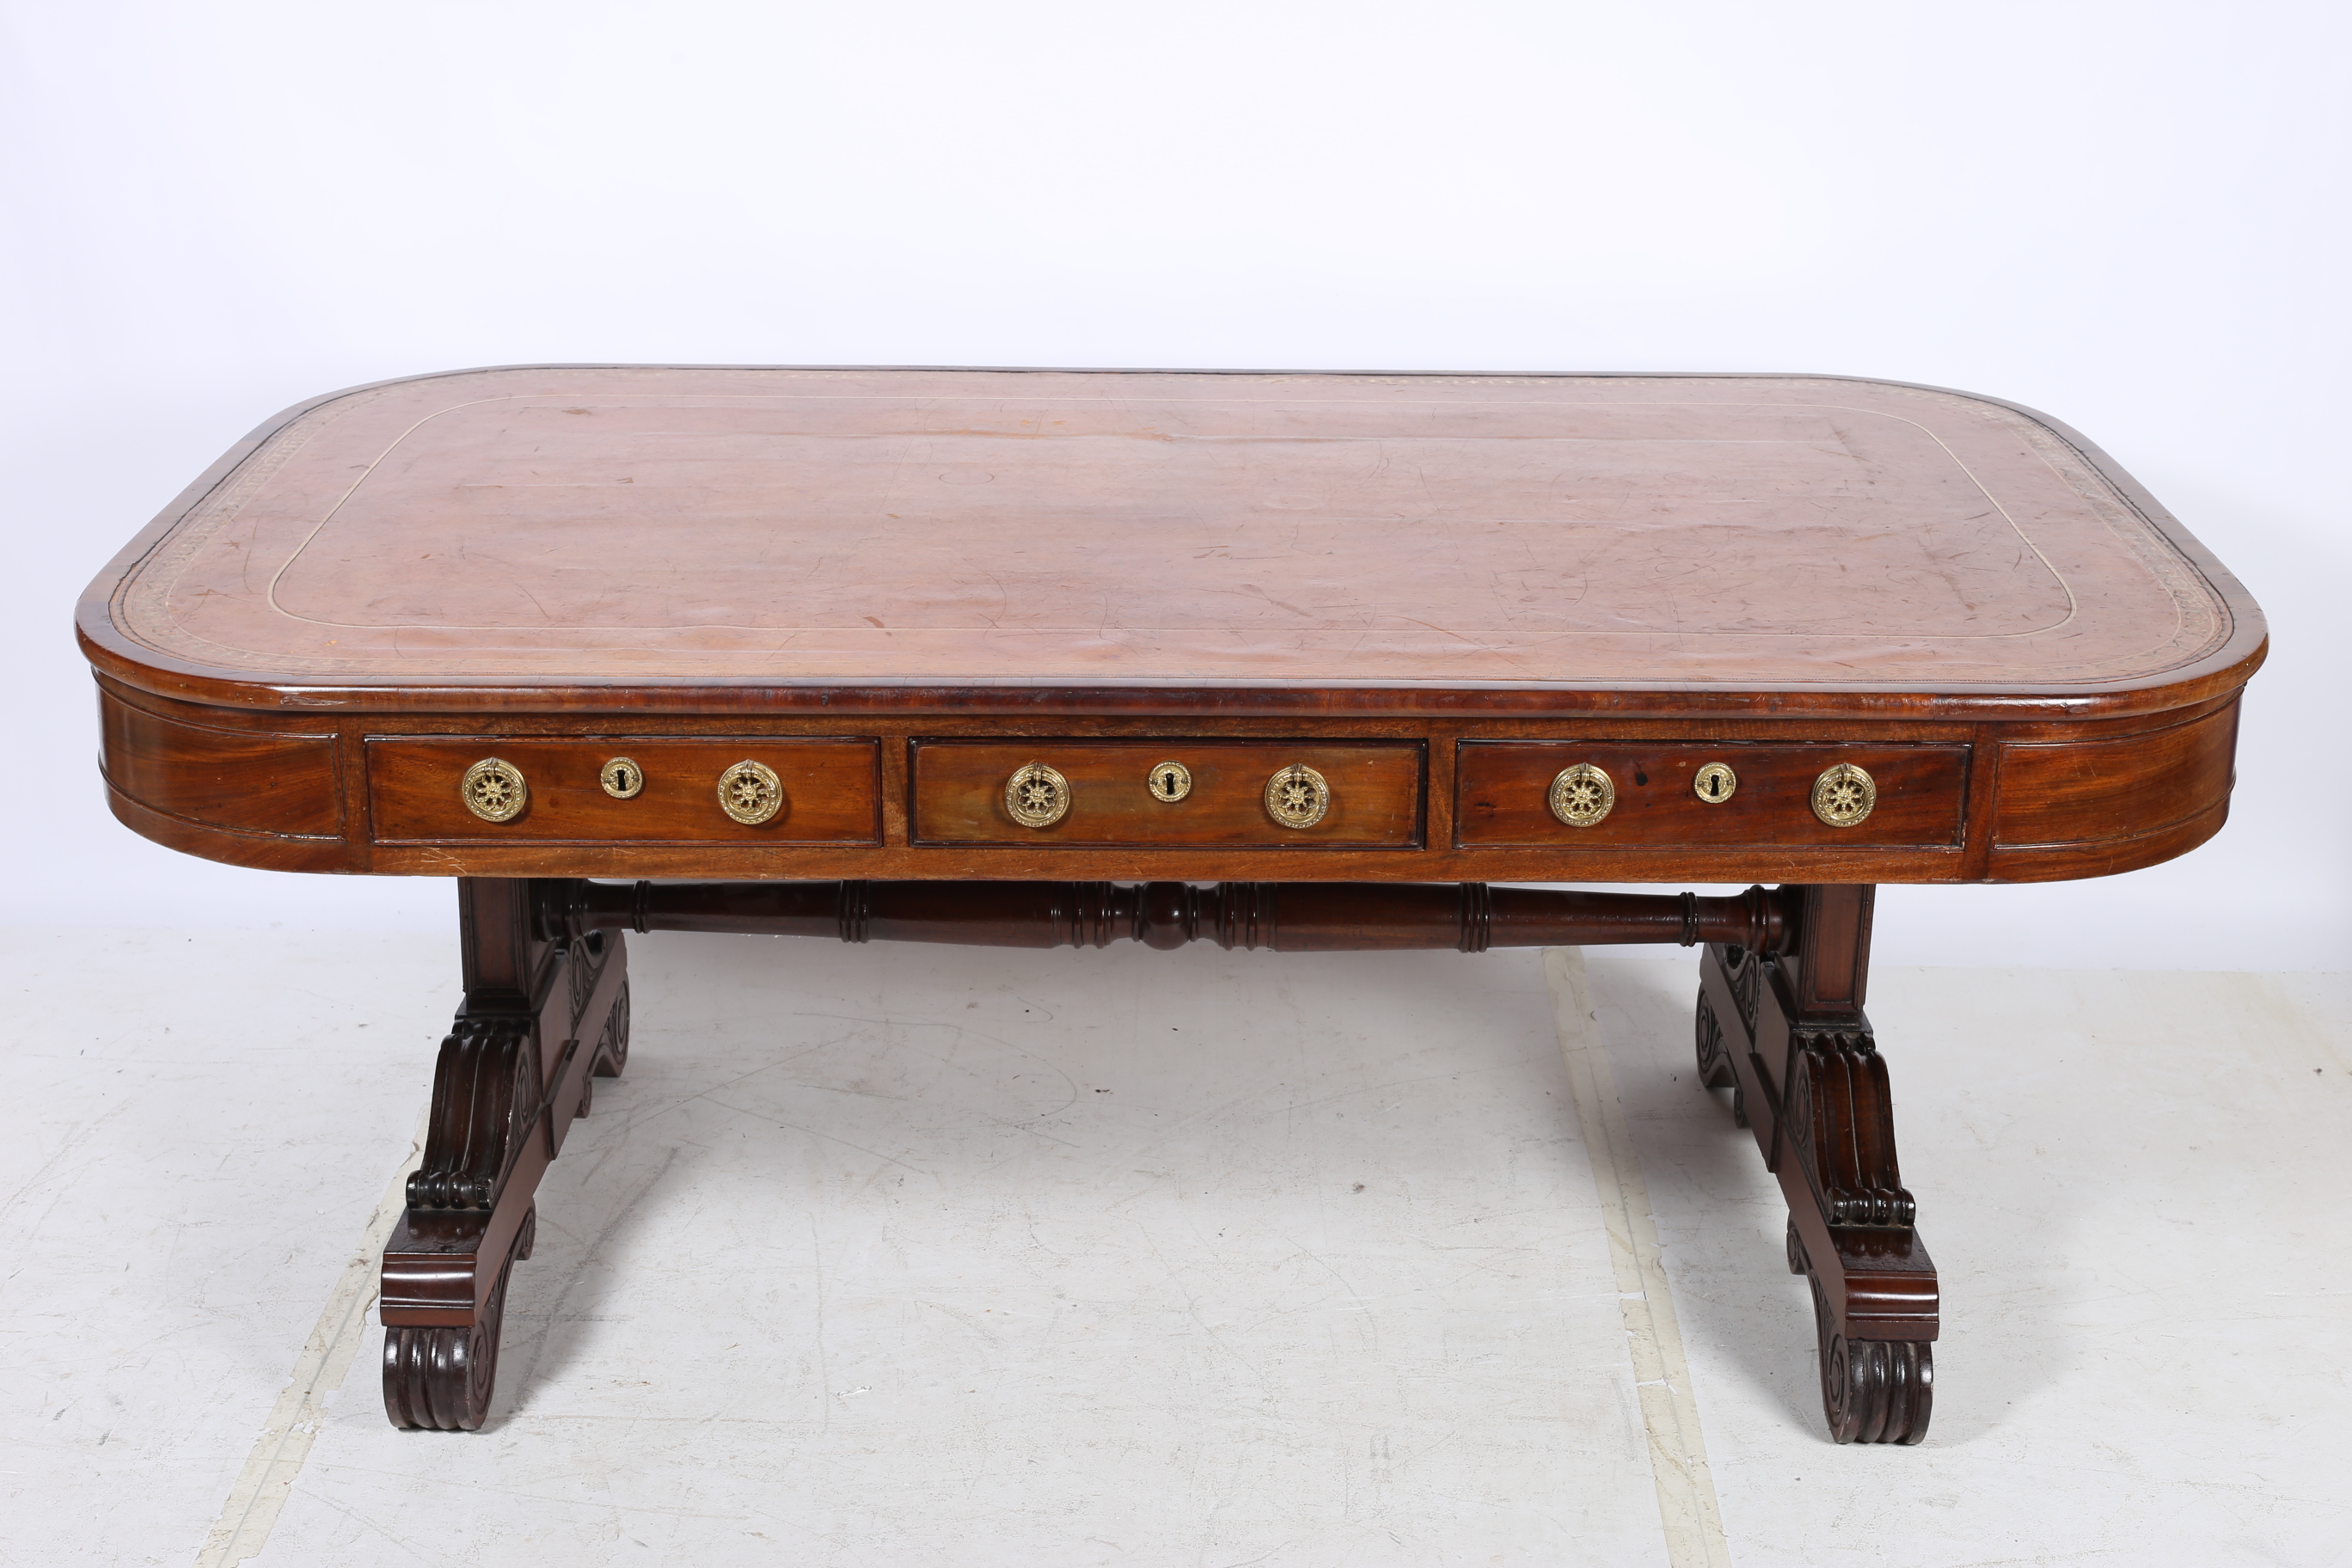 A FINE REGENCY MAHOGANY LIBRARY TABLE of rectangular outline with rounded corners and three frieze